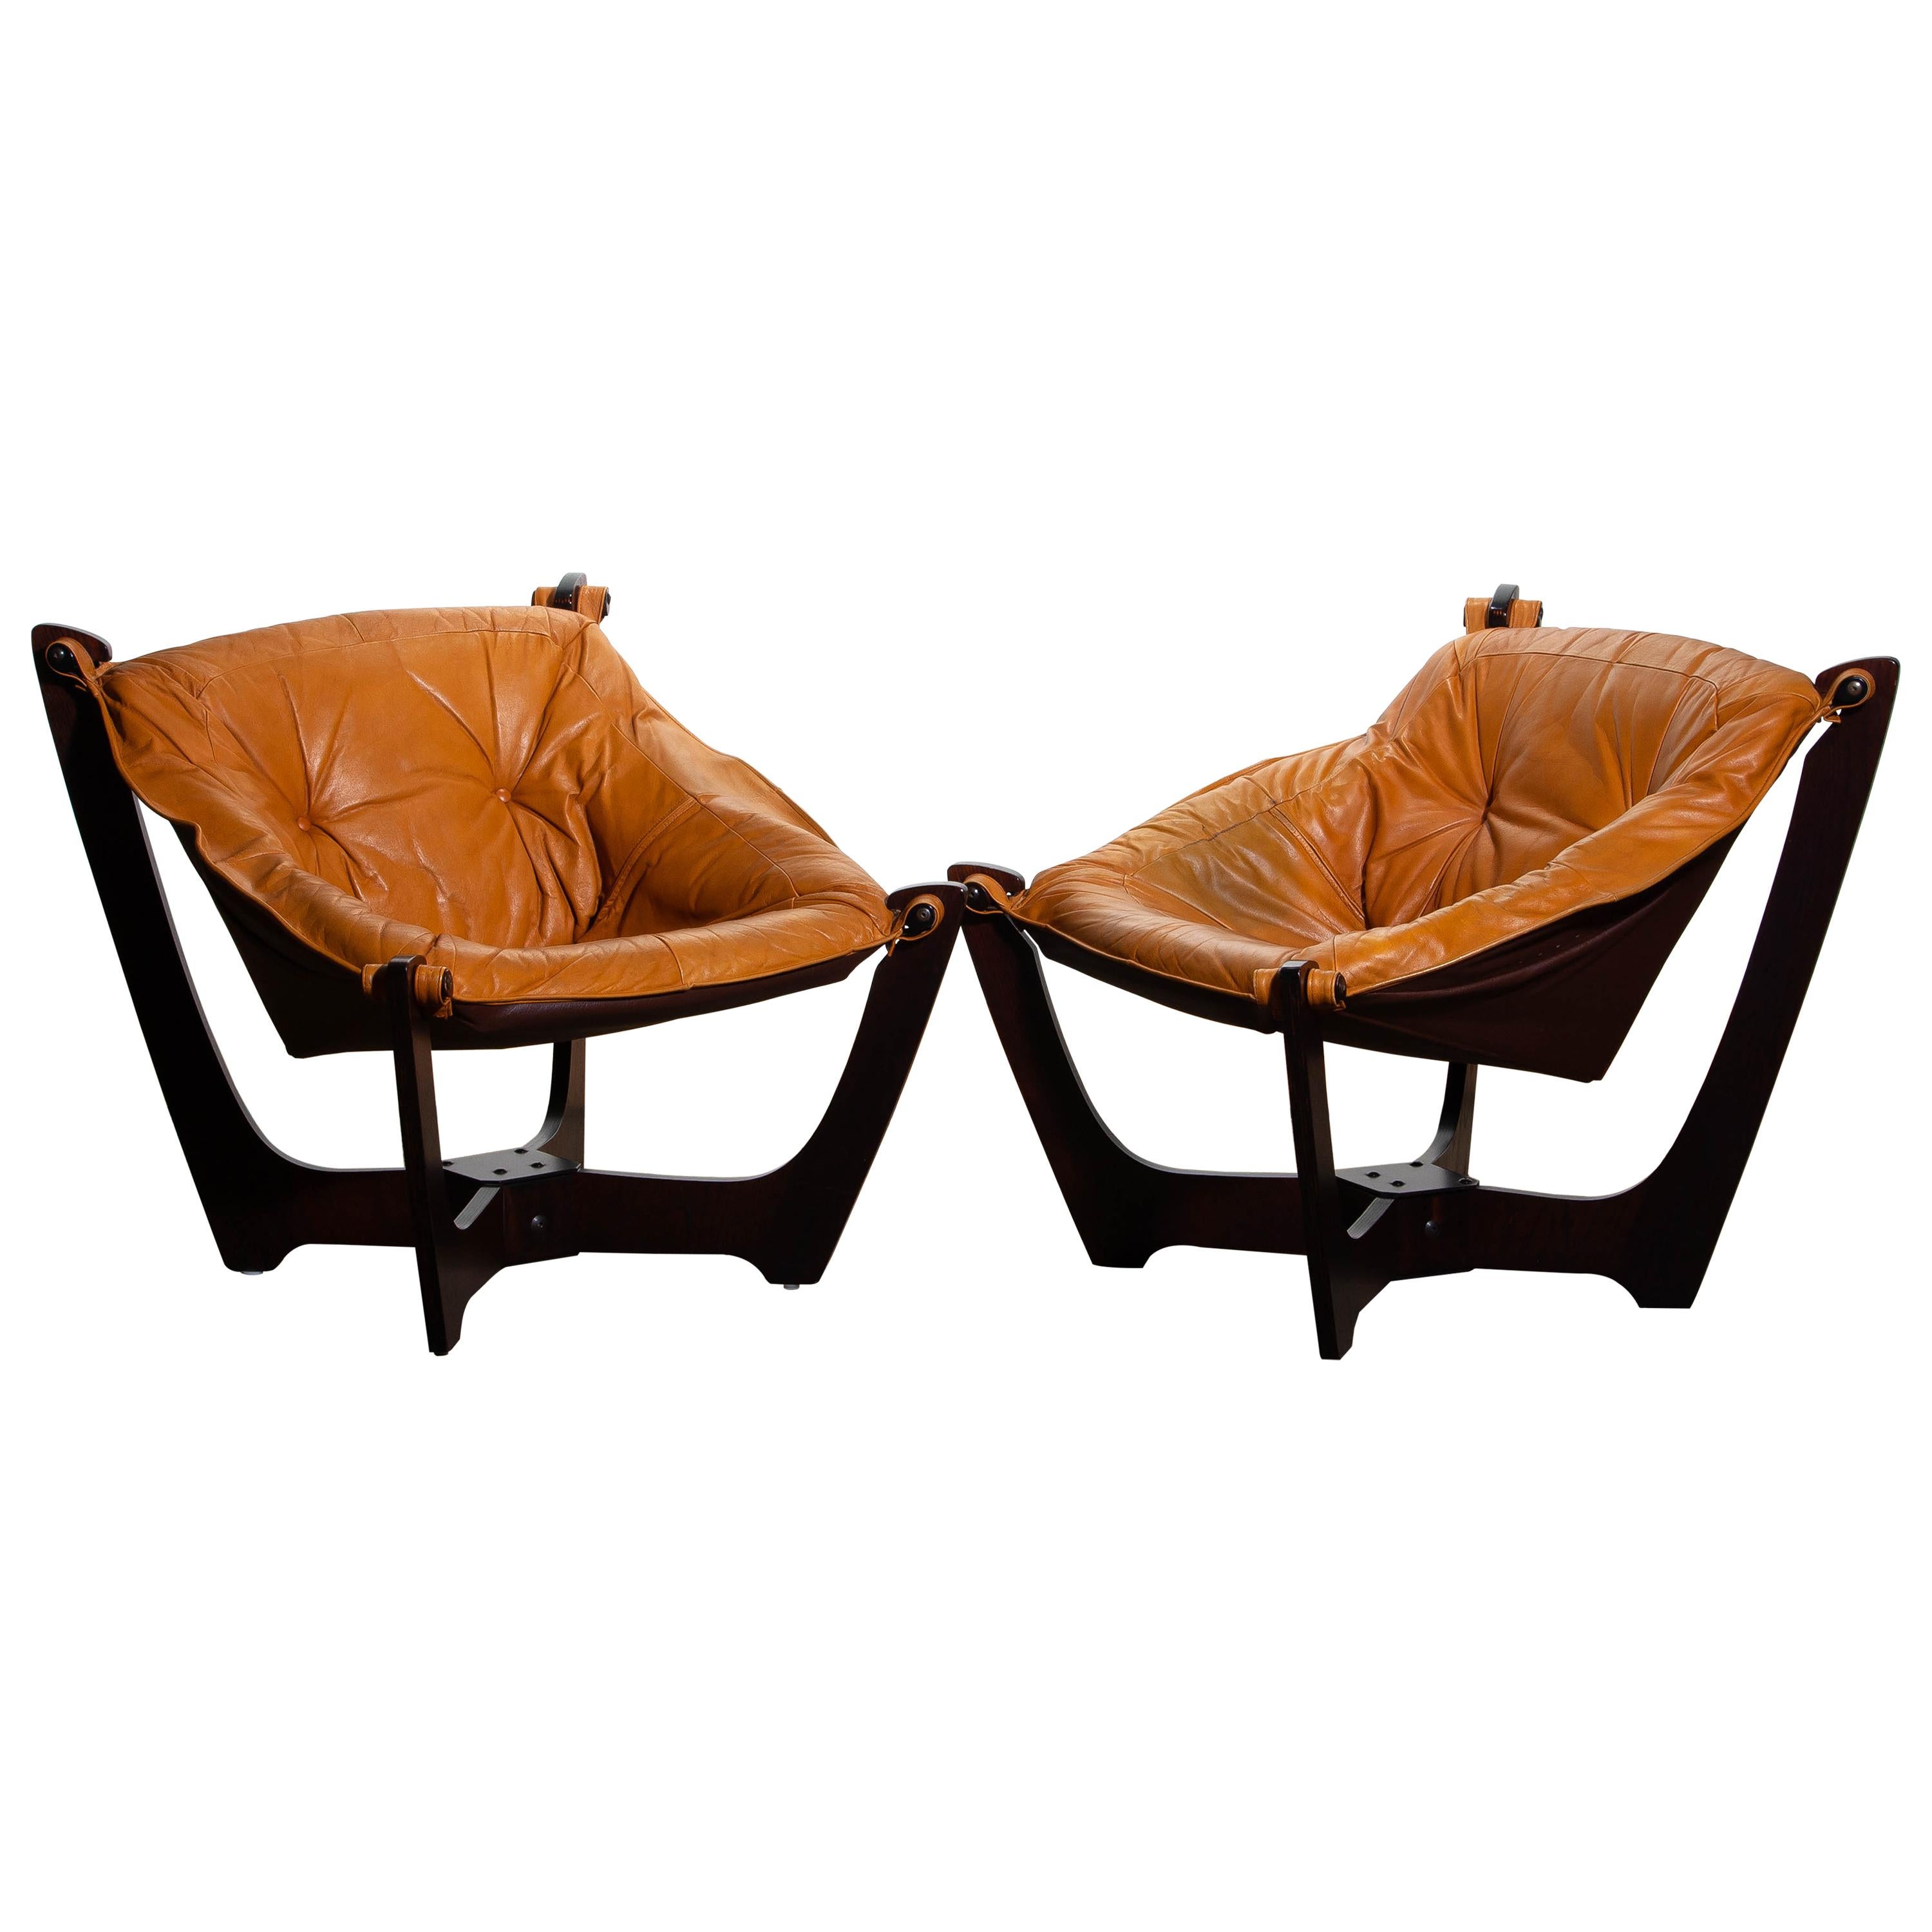 Mid-Century Modern 1970 Pair of Leather Lounge Chairs by Odd Knutsen for Hjellegjerde Møbler Norway